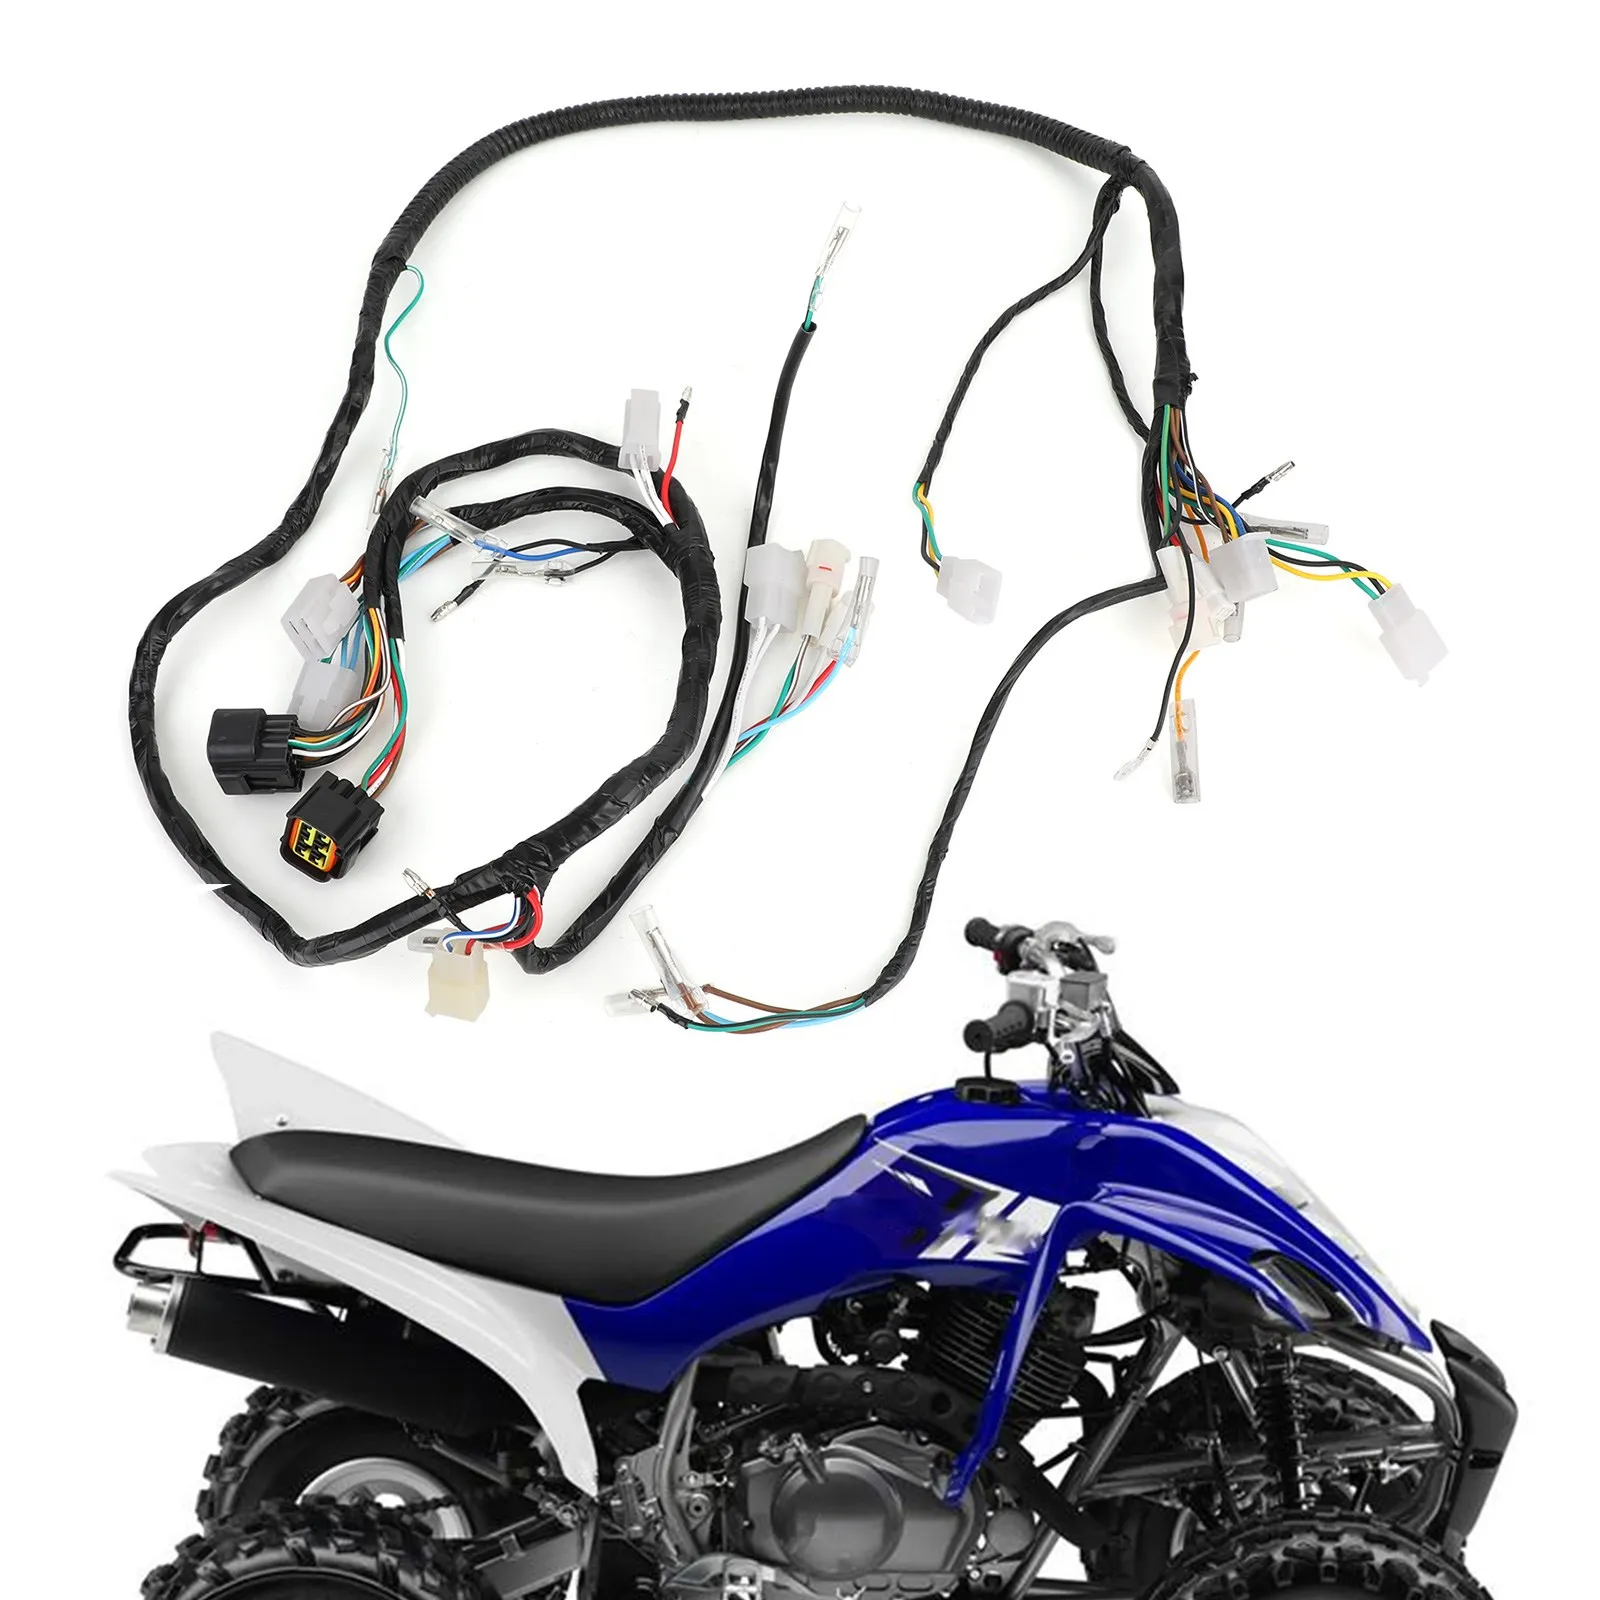 

WIRE HARNESS for Yamaha Warrior 350 YFM350 1997-2001 3GD-82590-40-00 Motorcycle Accessories Parts